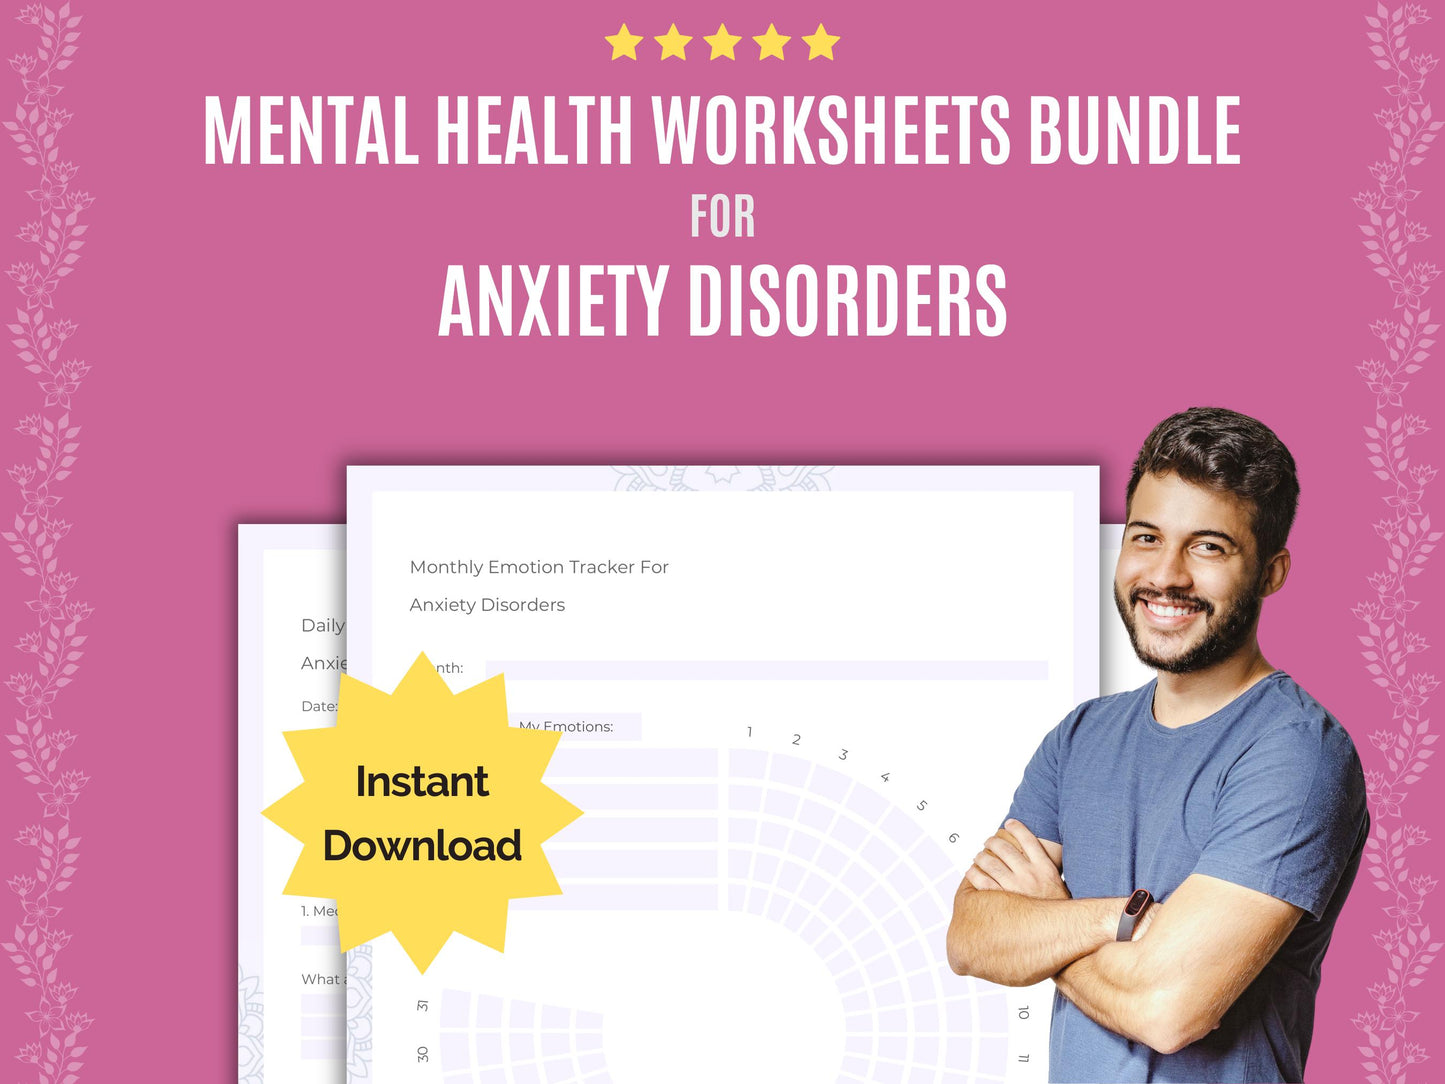 Anxiety Templates, Anxiety Workbooks, Anxiety Counseling, Anxiety Tools, Anxiety Planners, Anxiety Resources, Anxiety Journals, Anxiety Cheat Sheet, Anxiety Therapy, Anxiety Journaling, Anxiety Mental Health, Anxiety Goal Setting, Anxiety Notes